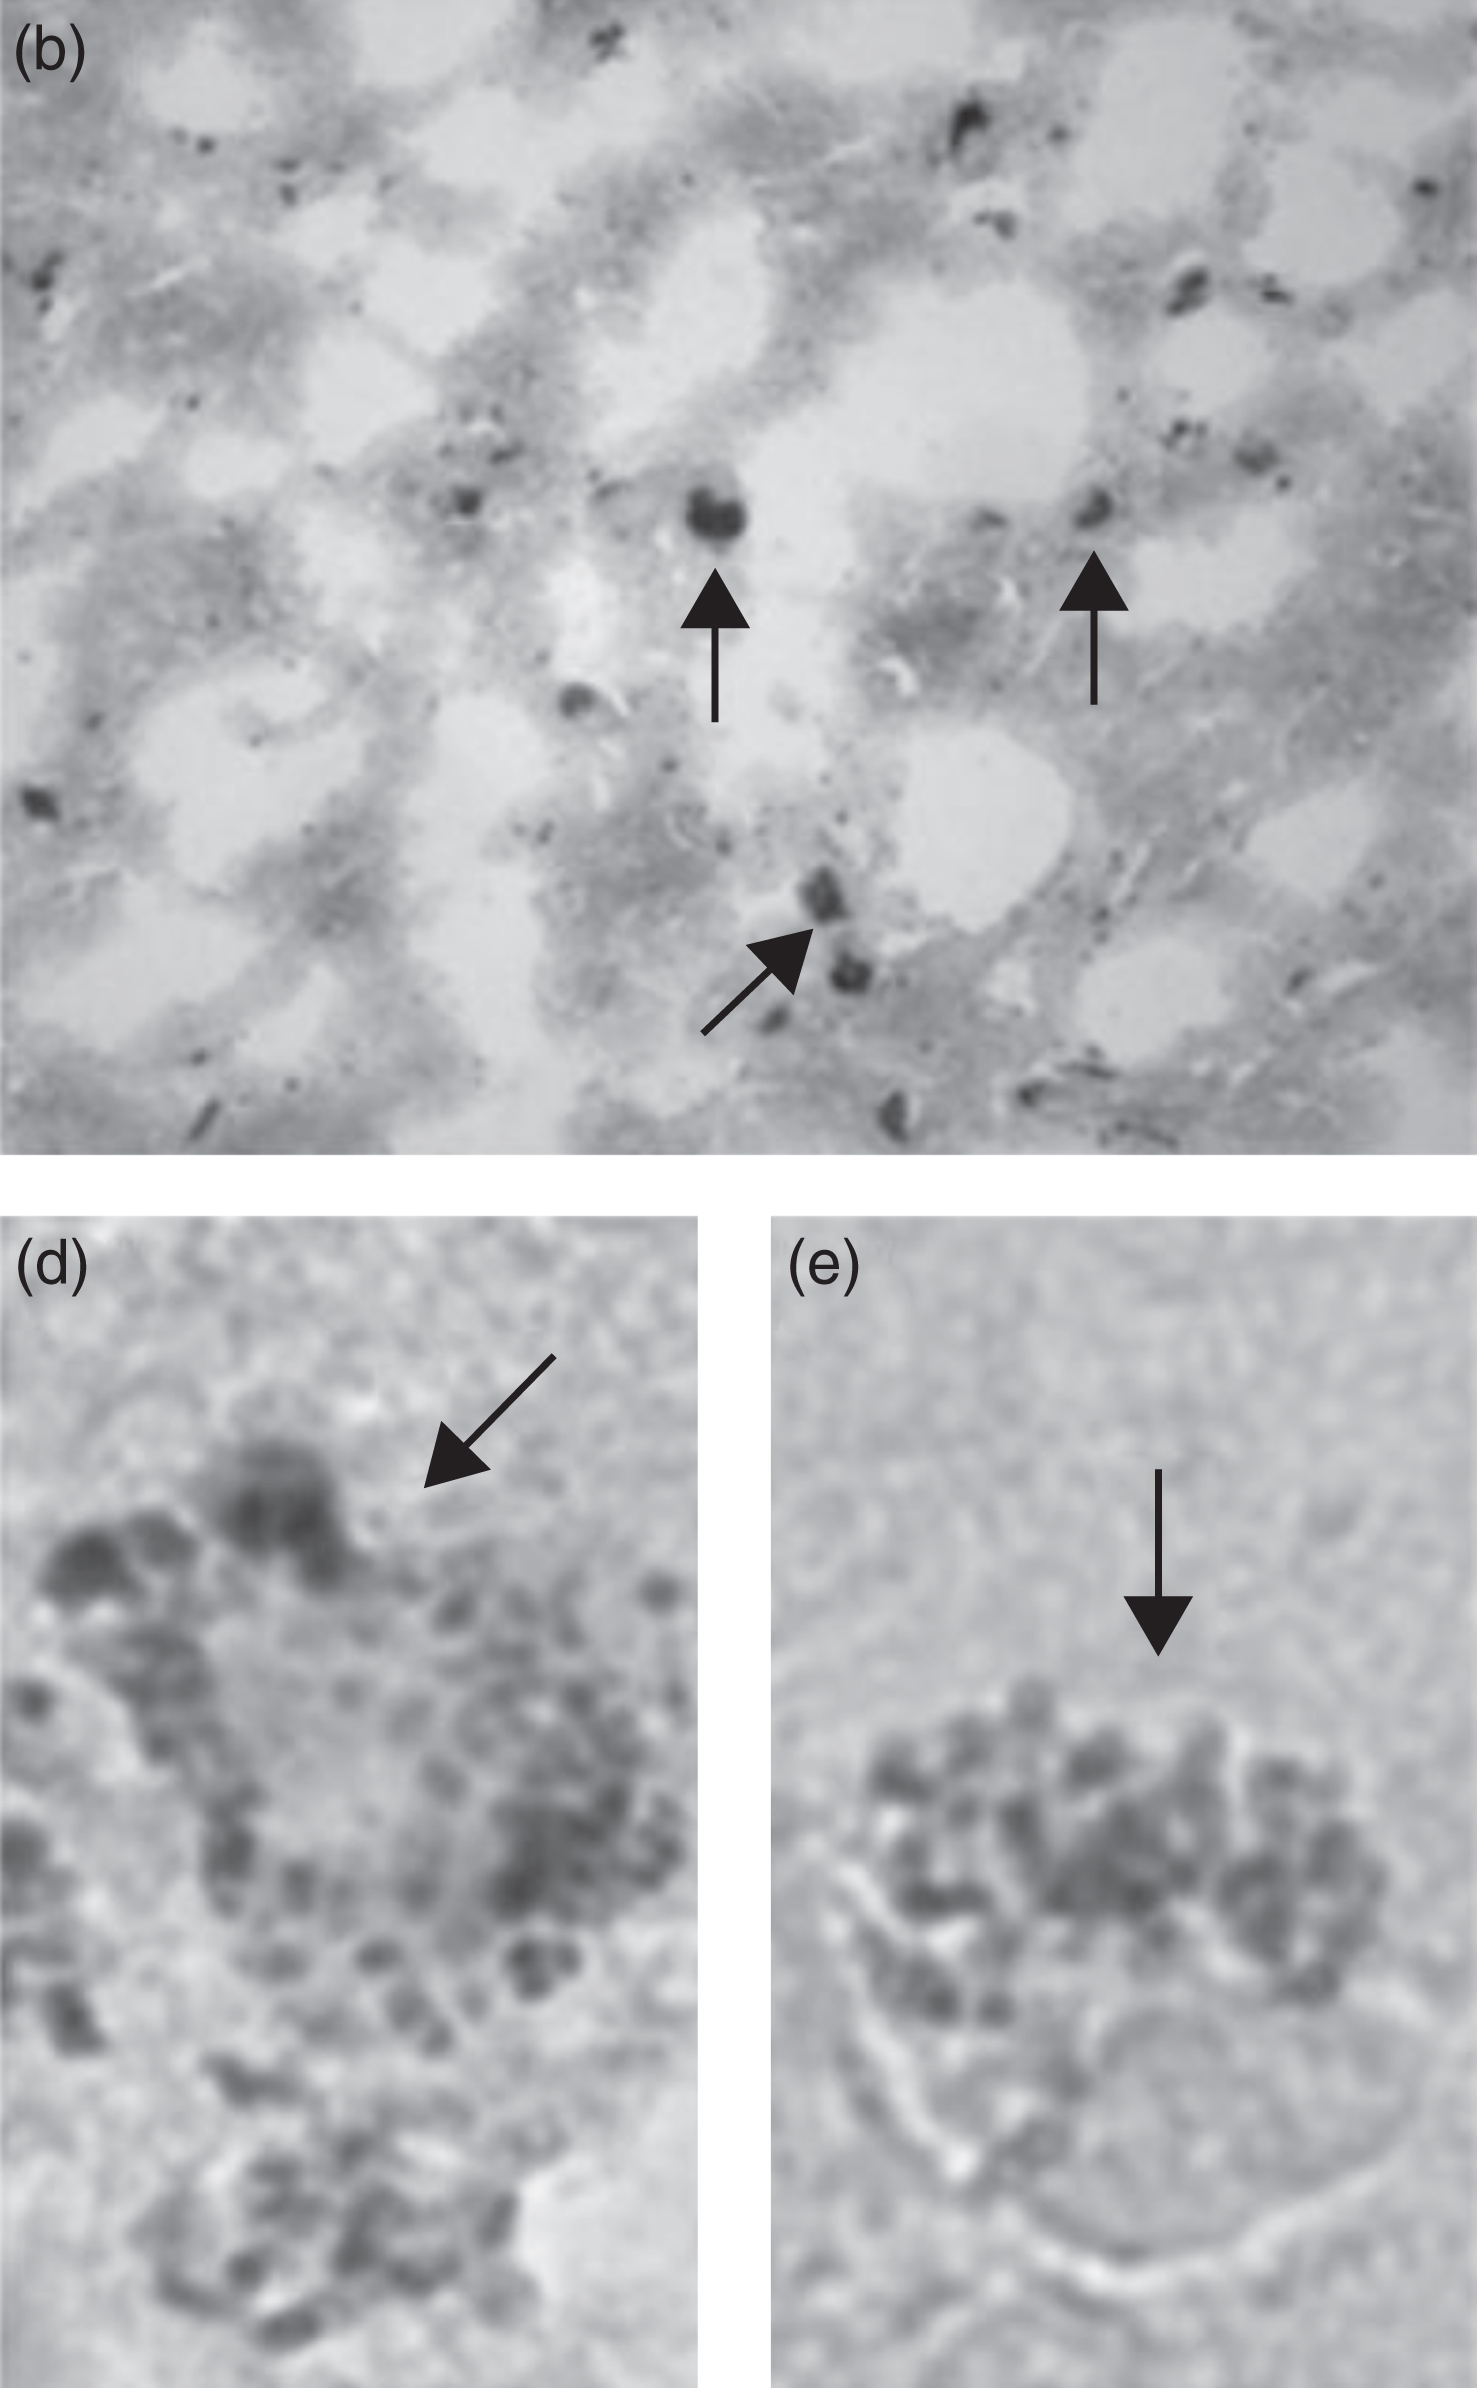 Images demonstrating Chlamydophila pneumoniae in AD brain tissue by in situ hybridization. Figure (b) demonstrates C. pneumoniae from the hippocampus of an AD brain by in situ hybridization. Figures (d) and (e) show photographic enlargement of cells harboring C. pneumoniae inclusions identified in AD brain tissue. Arrows indicate the signal for C. pneumoniae. Image (b) was obtained using a x40 objective. Figure from Gérard HC, Dreses-Werringloer U, Wildt KS, Deka S, Oszust C, Balin BJ, Frey WH 2nd, Bordayo EZ, Whittum Hudson JA, Hudson AP (2006) Chlamydophila (Chlamydia) pneumoniae in the Alzheimer’s brain. FEMS Immunol Med Microbiol 48, 355-366 [7]. Copyright 2006. Reprinted with permission from John Wiley and Sons and permission from Brian Balin.